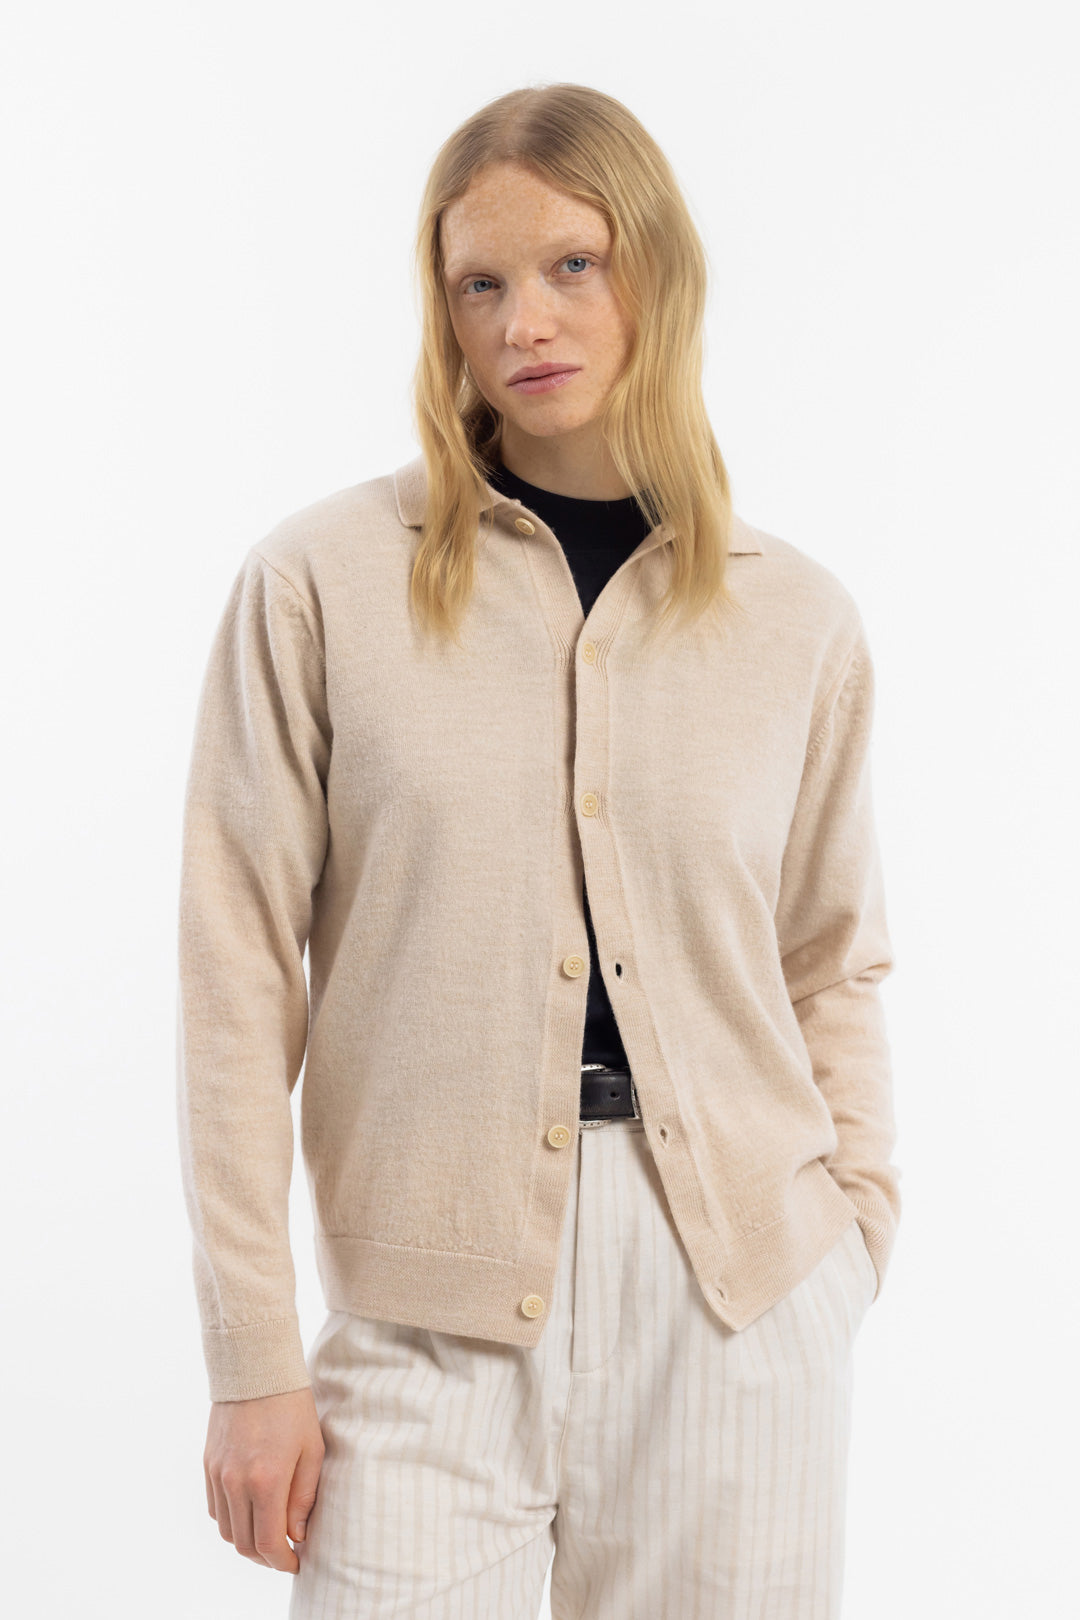 Sand-colored knitted shirt made of merino wool by Rotholz